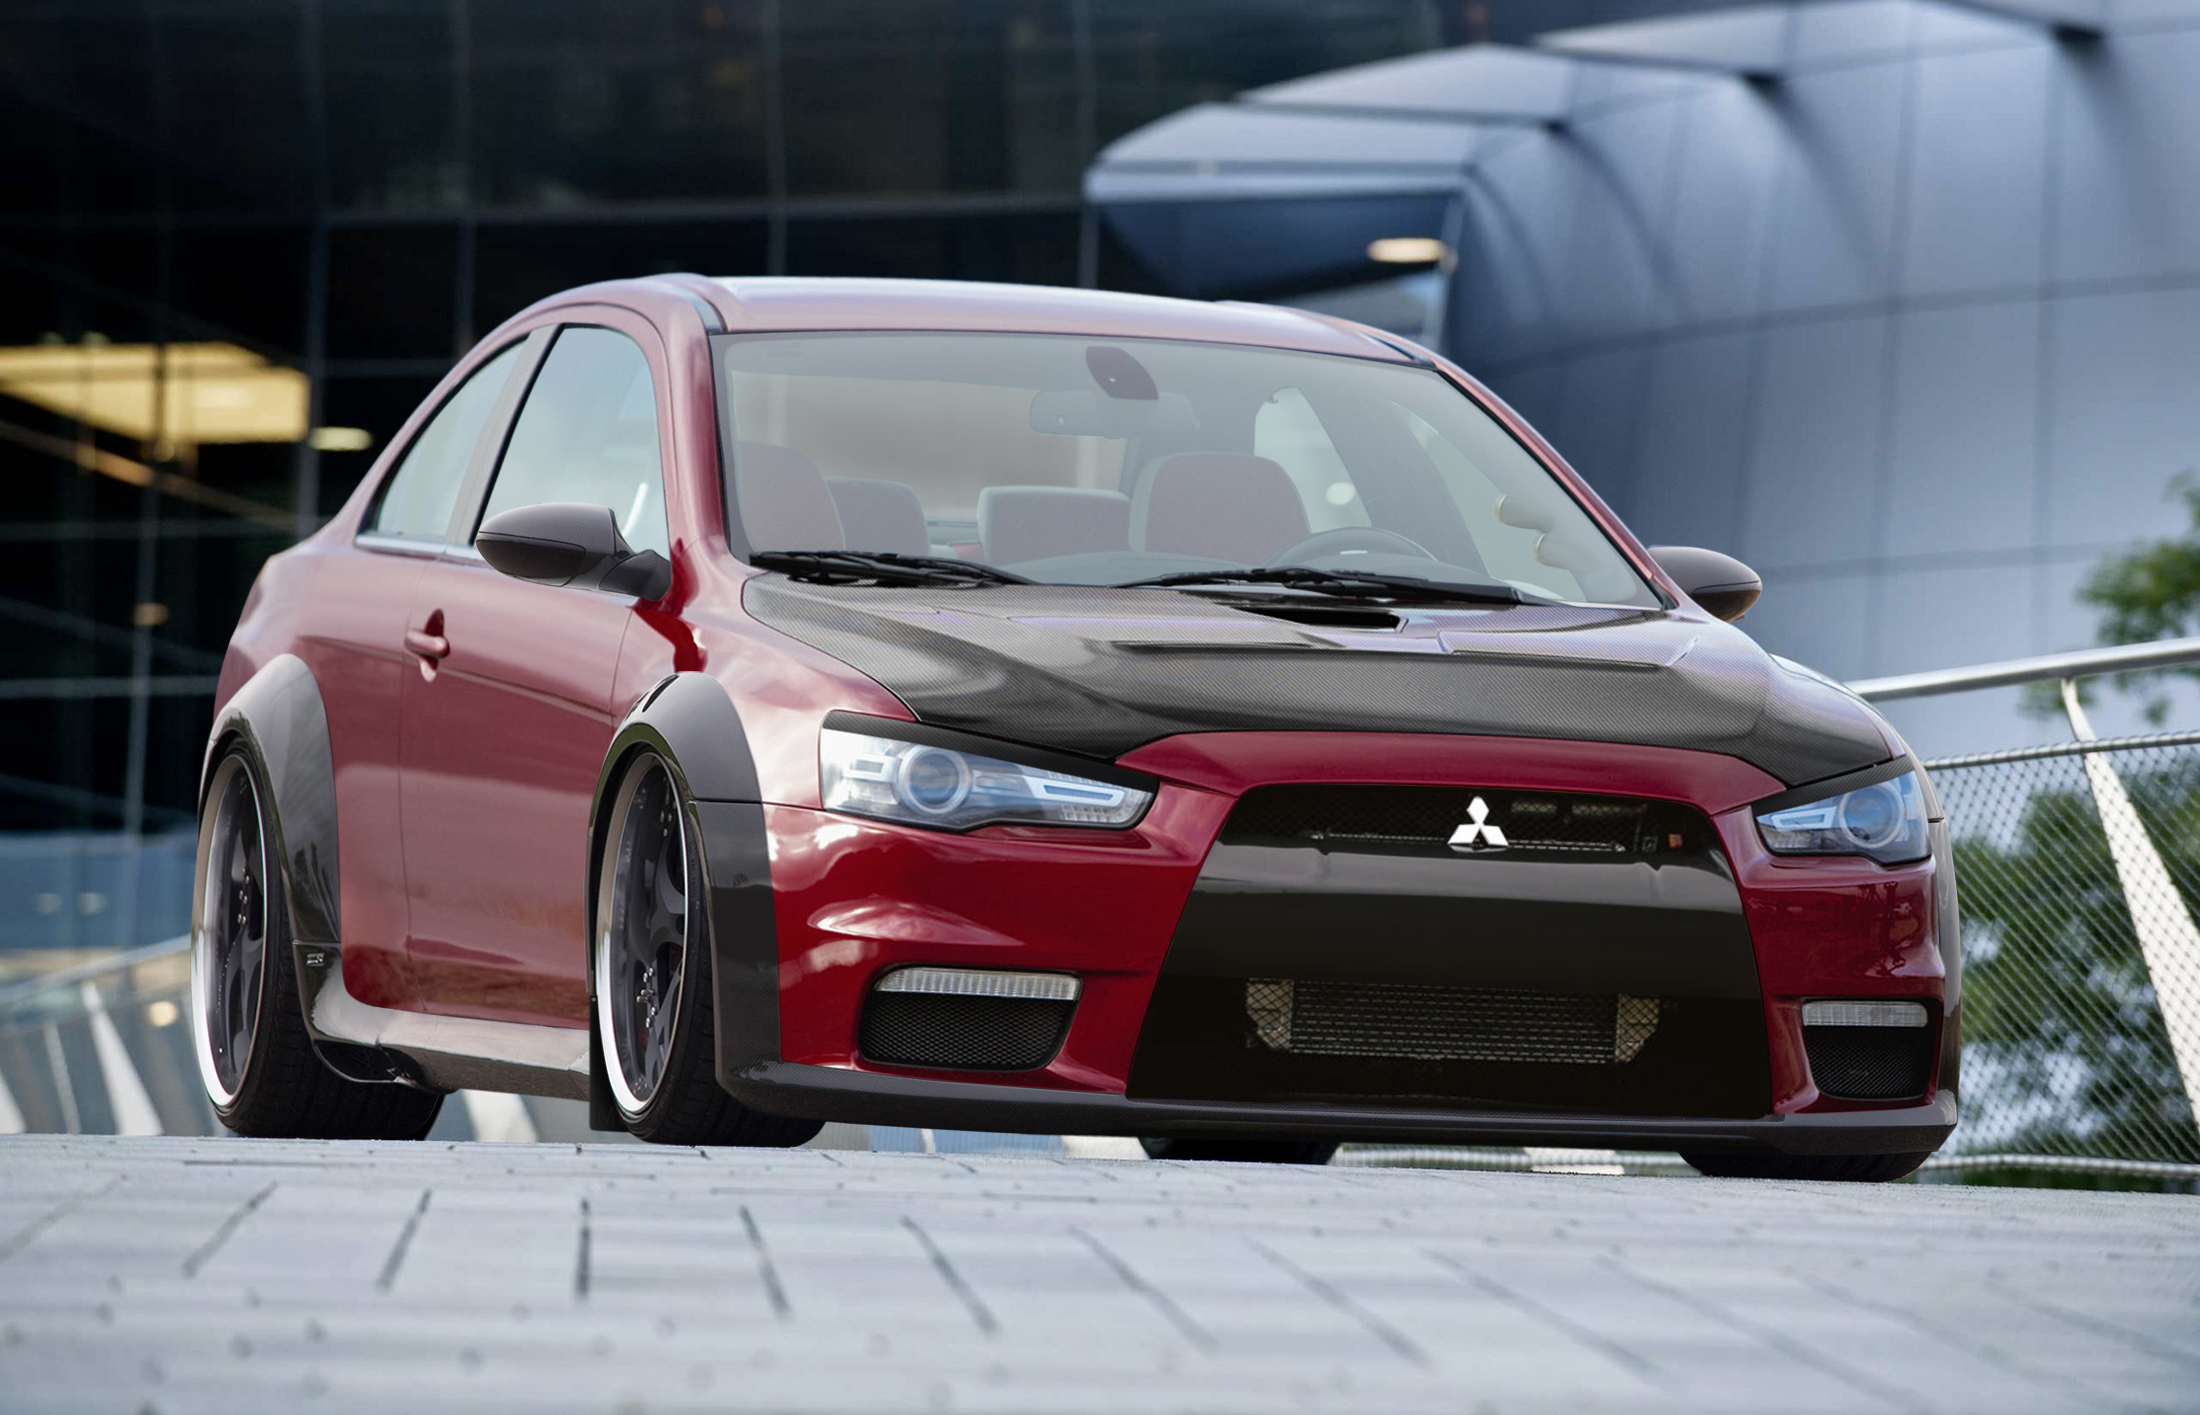 Evo_Coupe_by_Chopperkid44.jpg